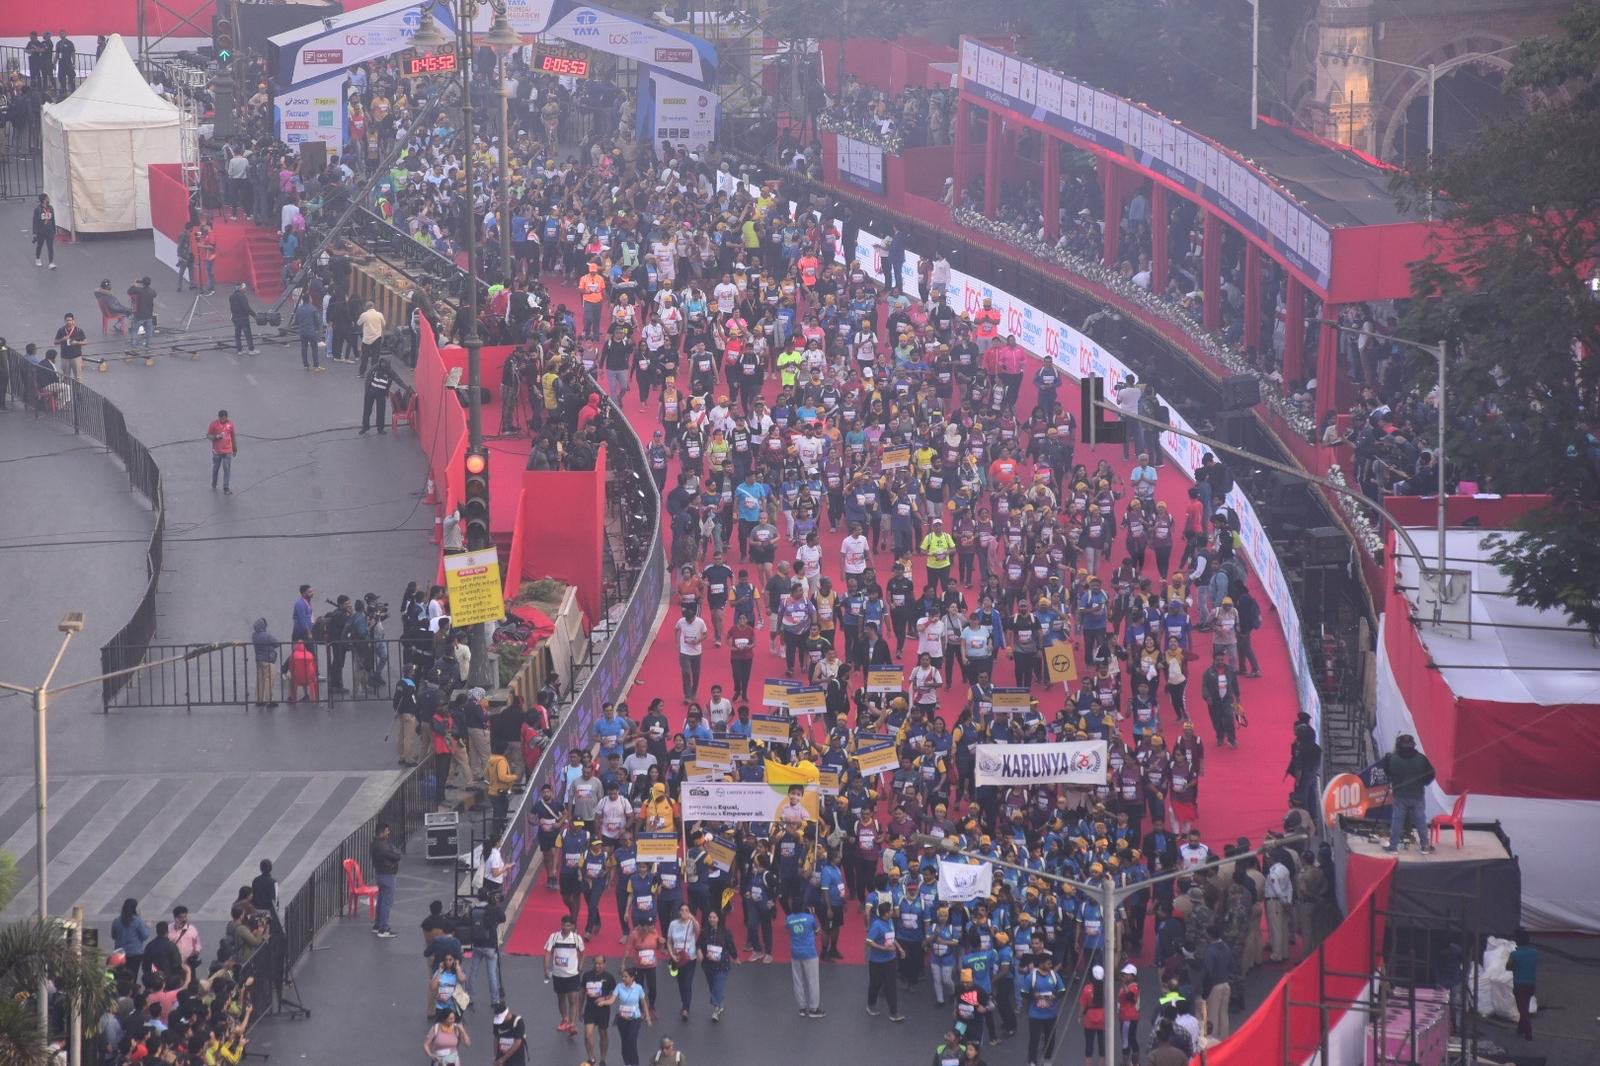 A total of 3,145 police constables and 540 officers will be deployed on the routes of the marathon and at important locations in south Mumbai and central Mumbai from where the runners will pass through, an official told PTI